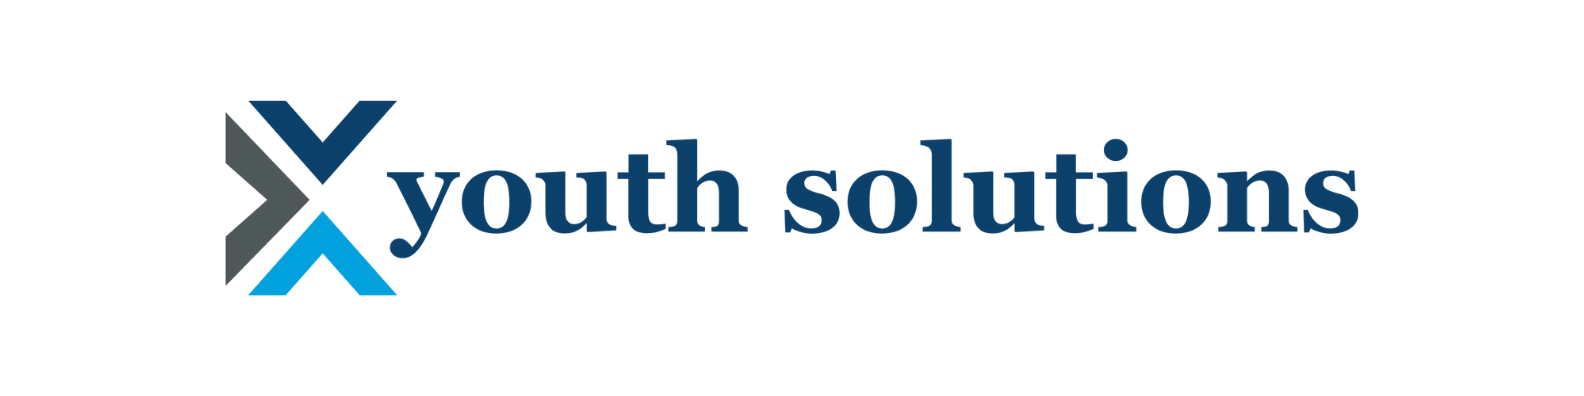 Youth Solutions Logo.png